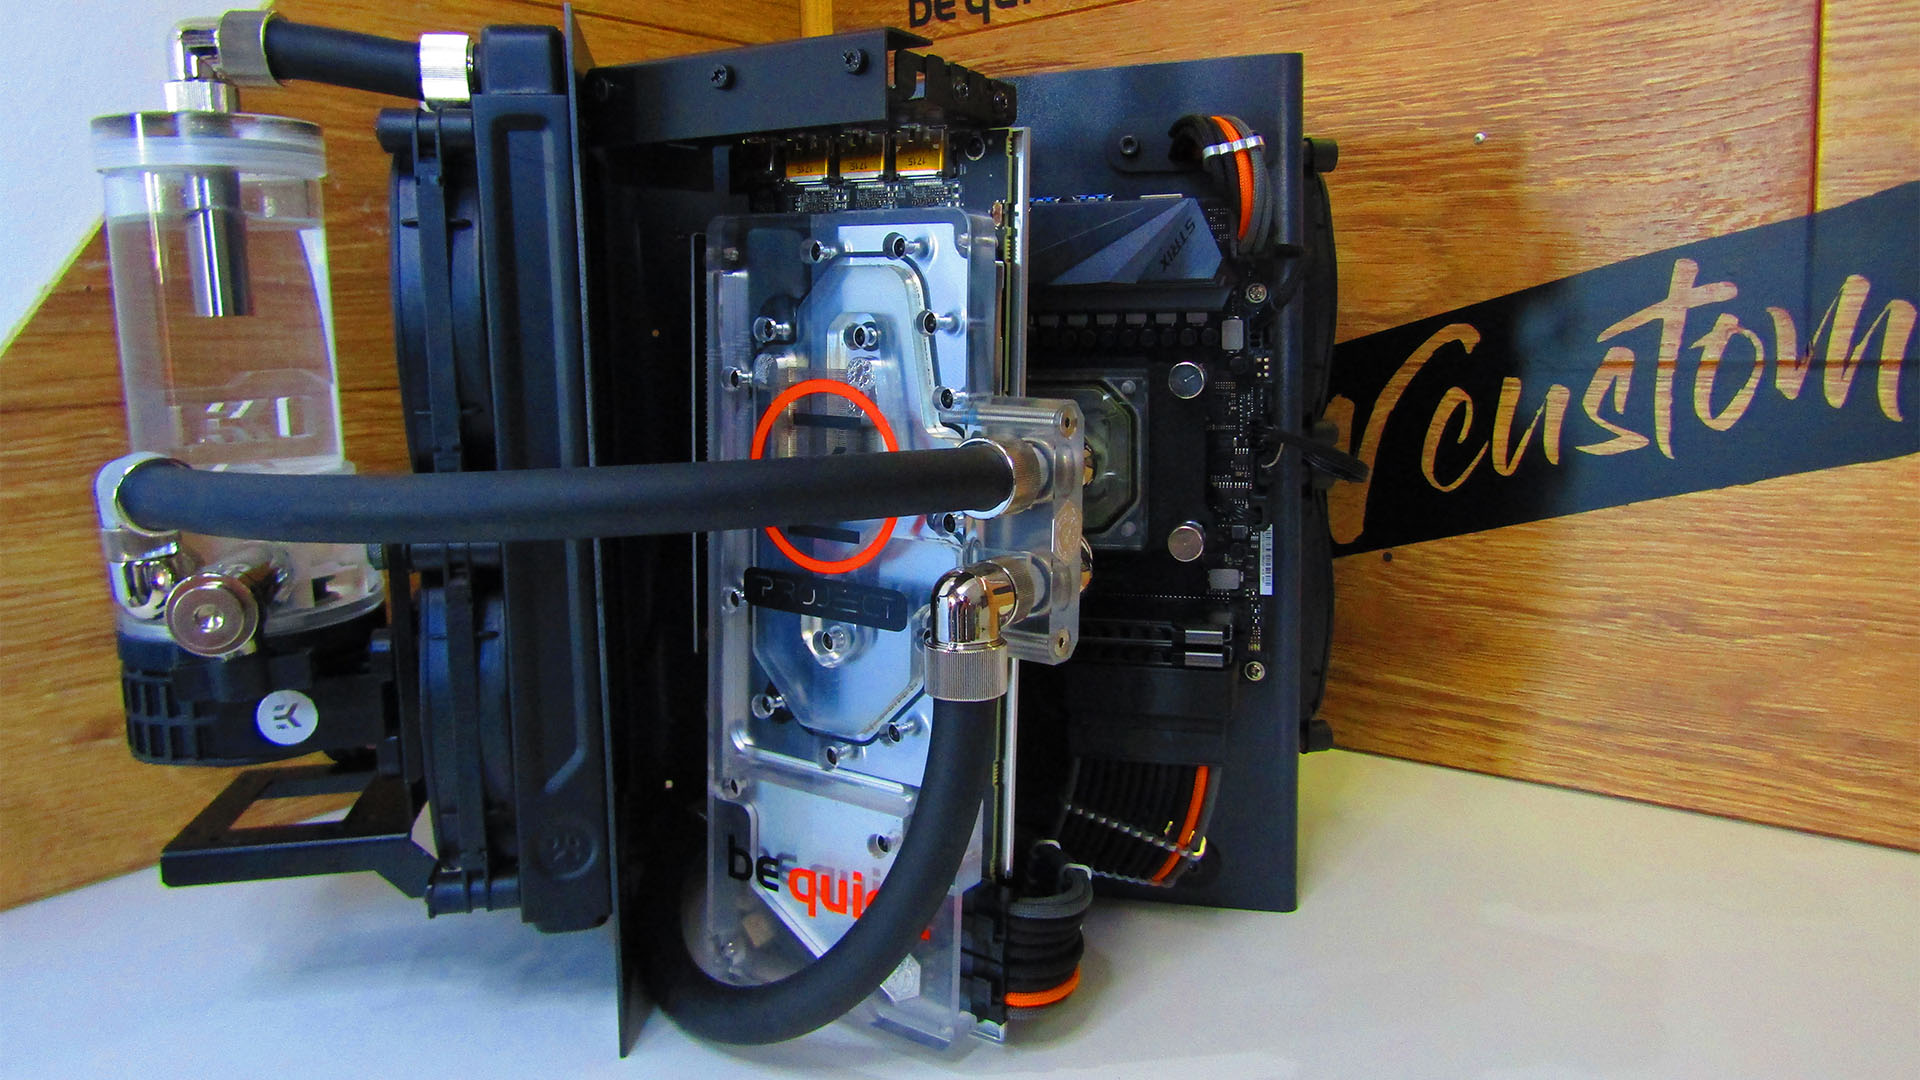 The full mini-itx gaming pc with a parallel loop